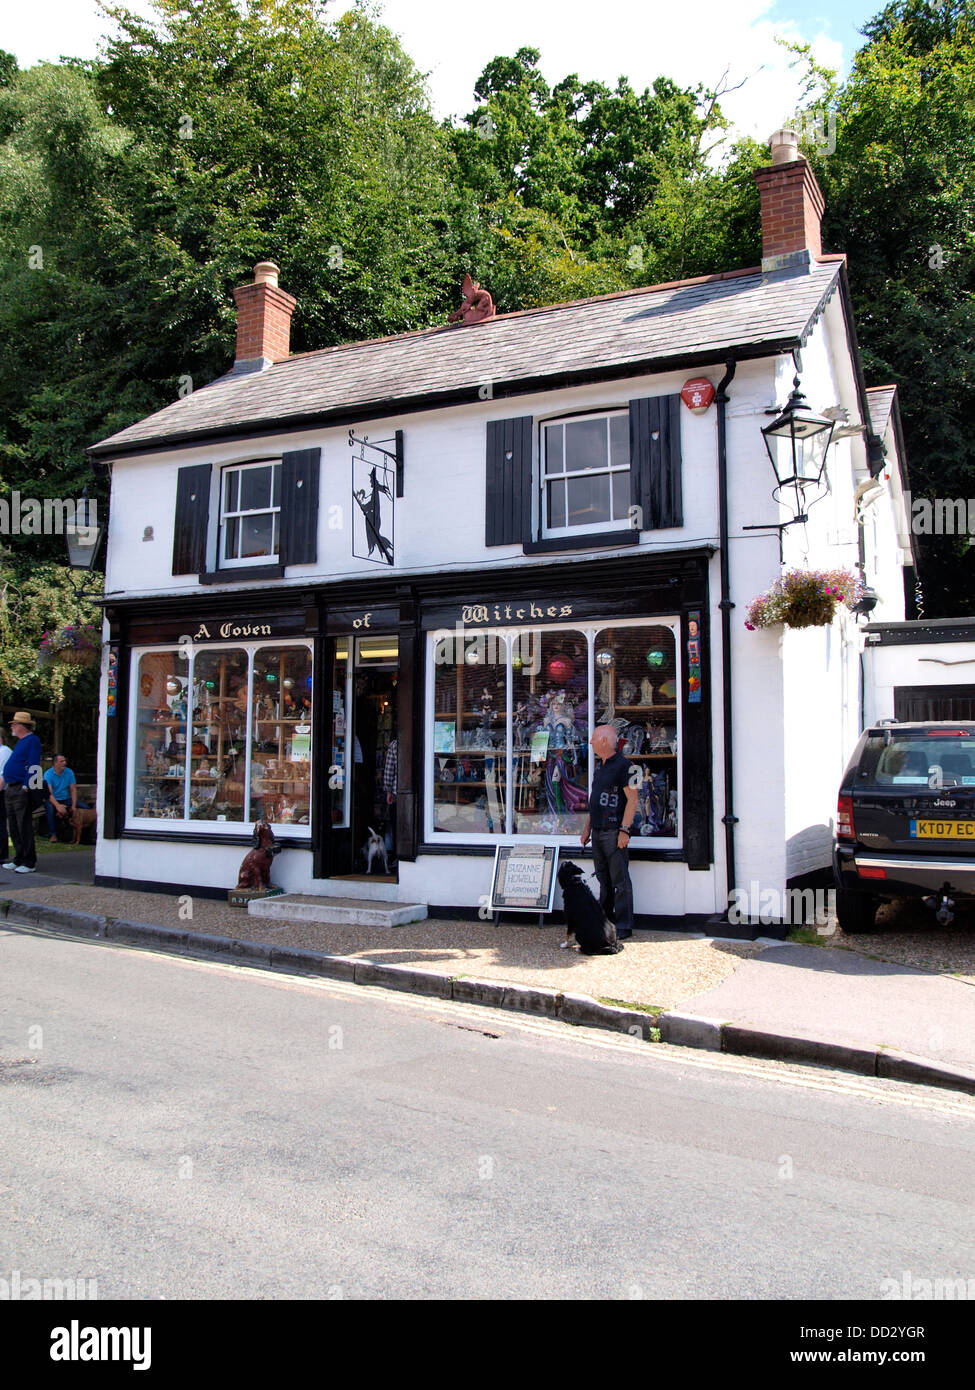 A Coven of Witches shop, Burley, New Forest, Hampshire, UK 2013 Stock Photo